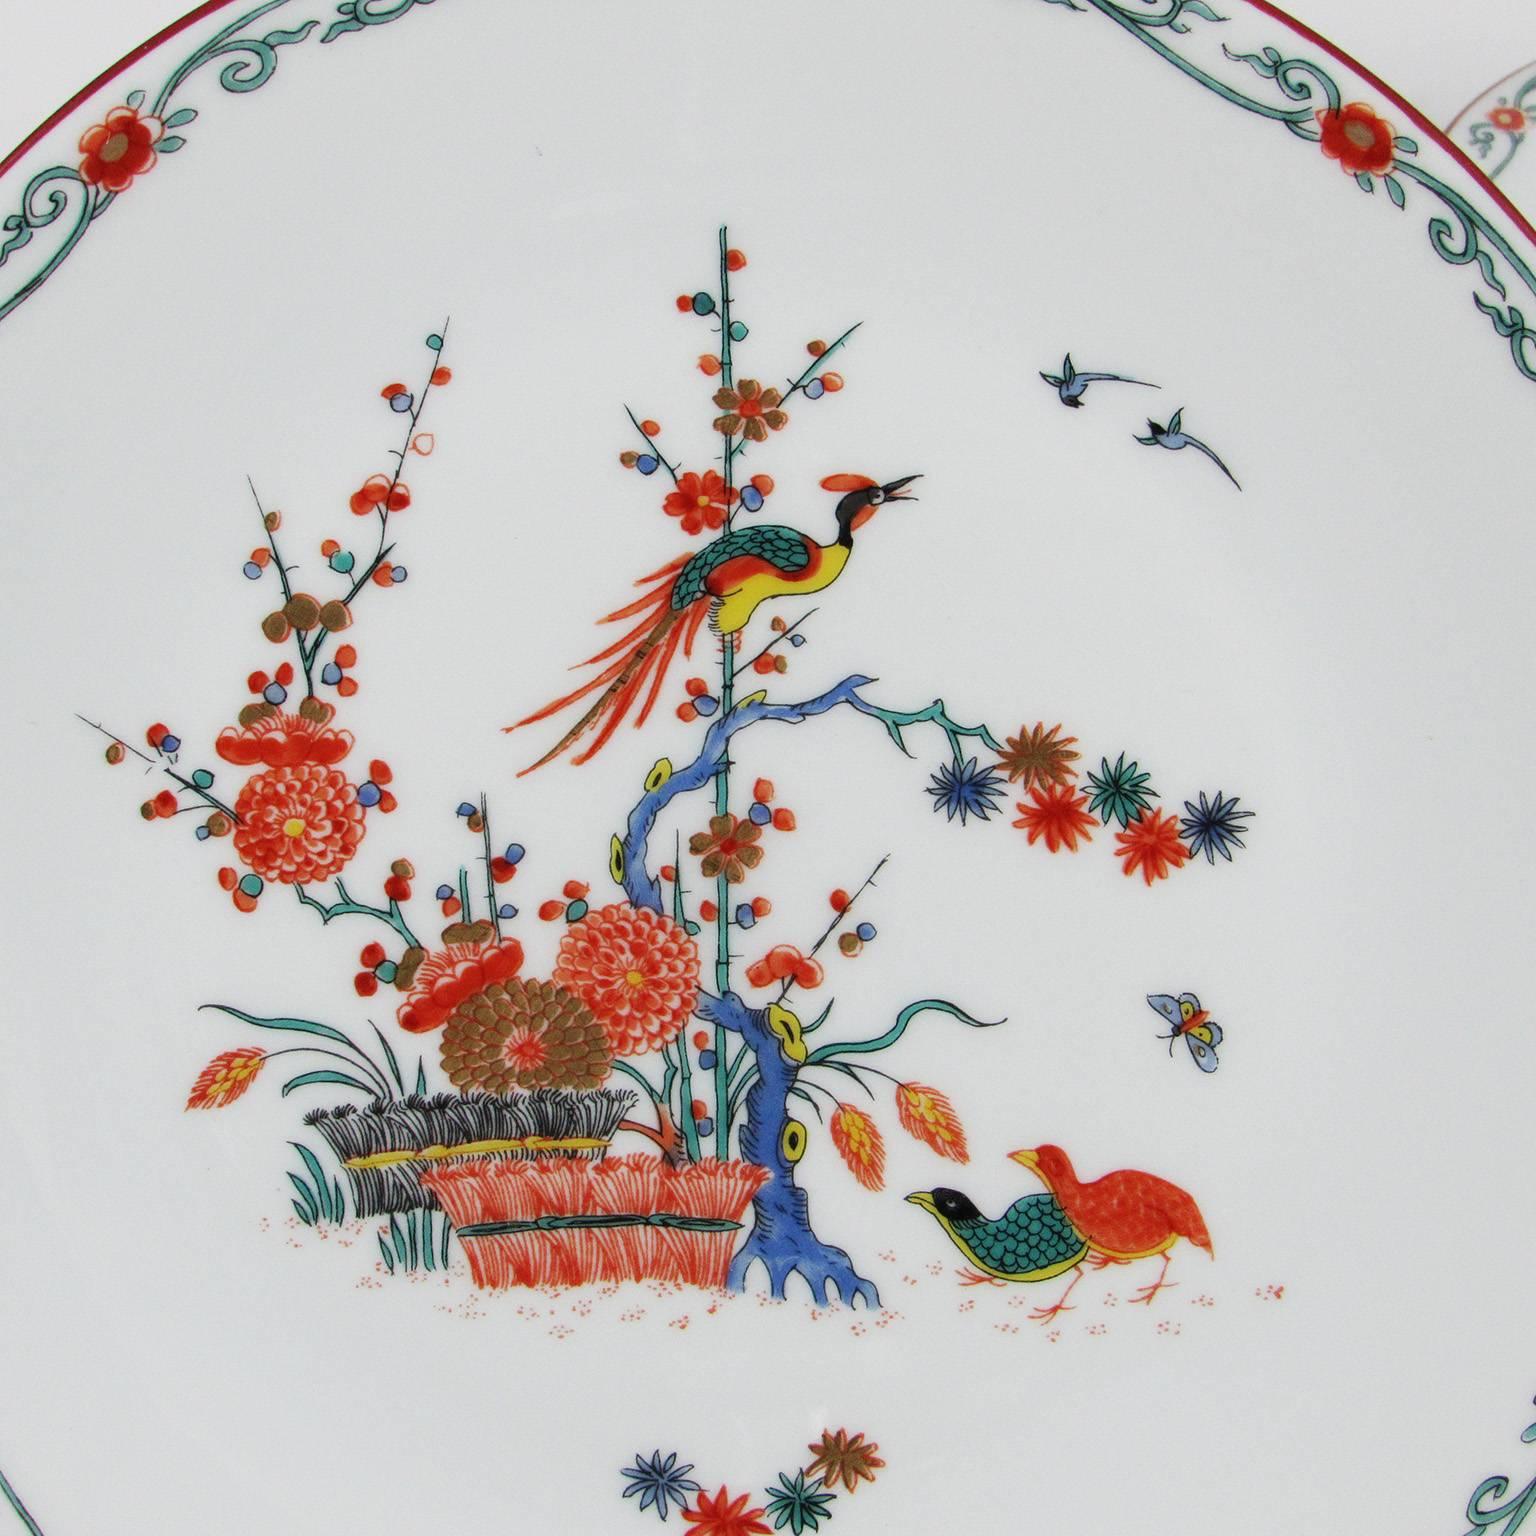 Set of 12 20th century Maison Puiforcat Chankai dinner plates. Multicolored porcelain plate embellished with a basket of chrysanthemums, quails, and birds and a frieze of flowering branches along the rim. Stamped in red 